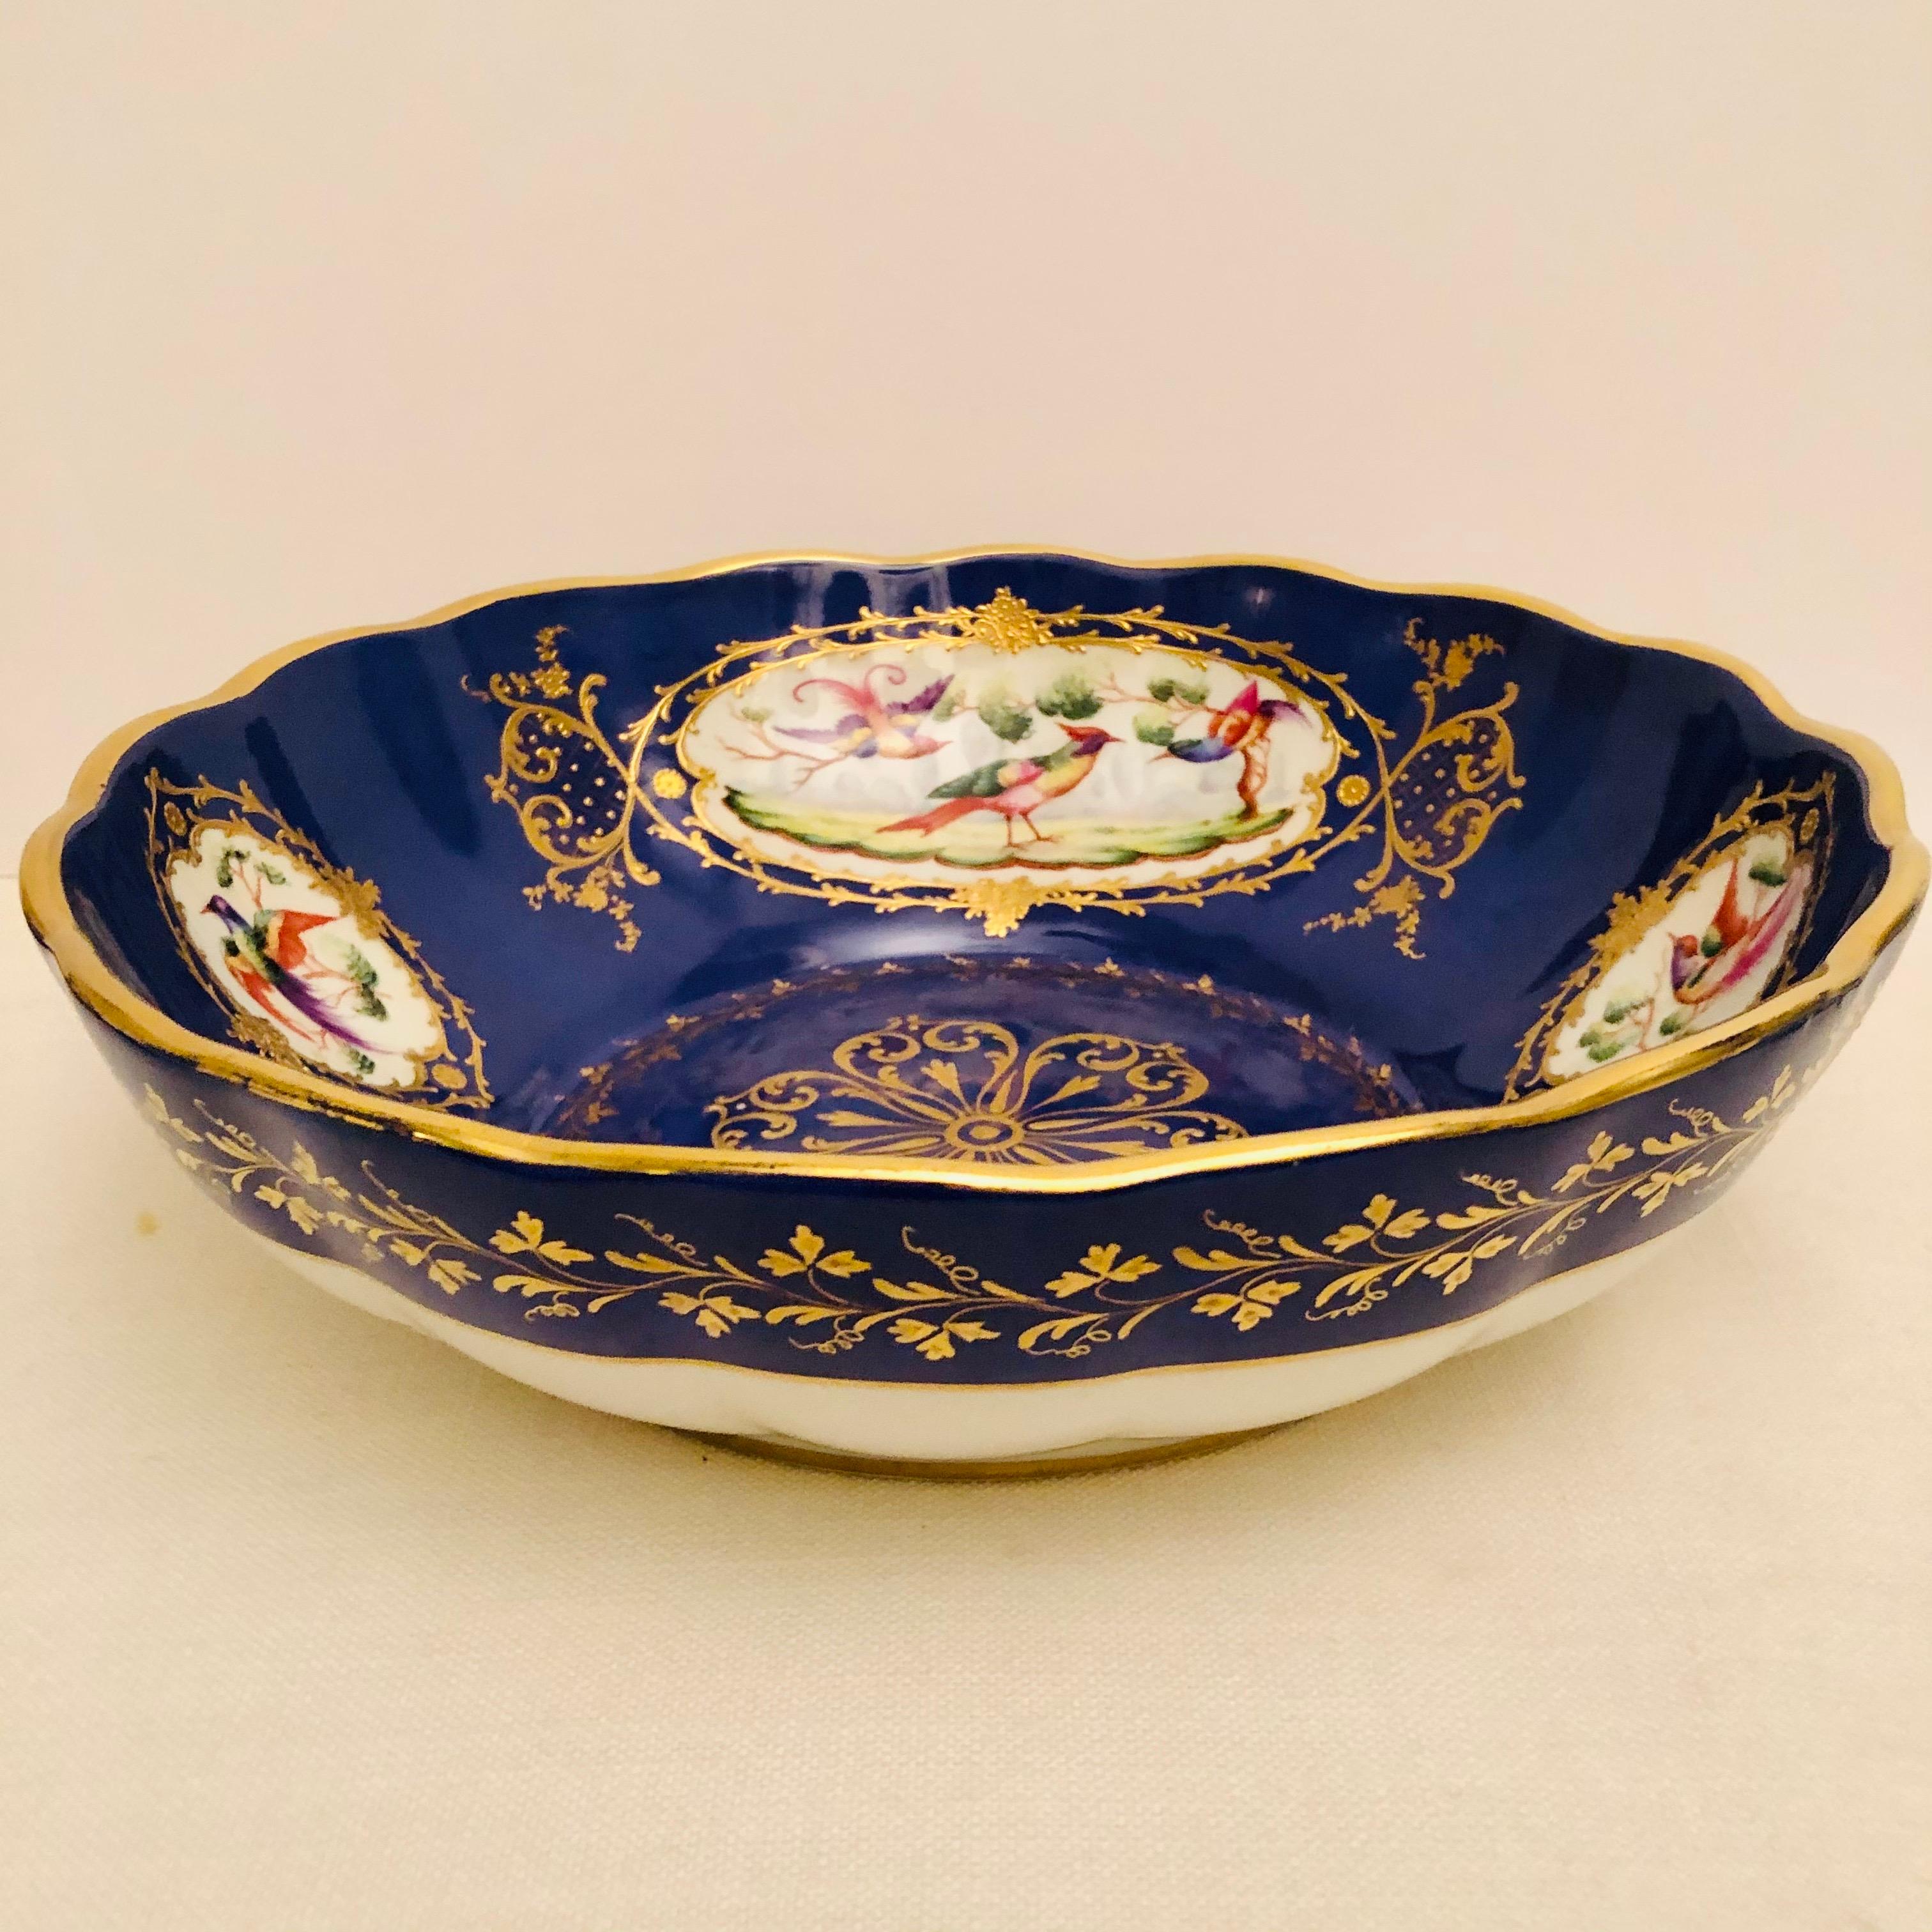 Belle Époque Le Tallec Bowl Painted with 4 Medallions of Exotic Birds on Royal Blue Ground